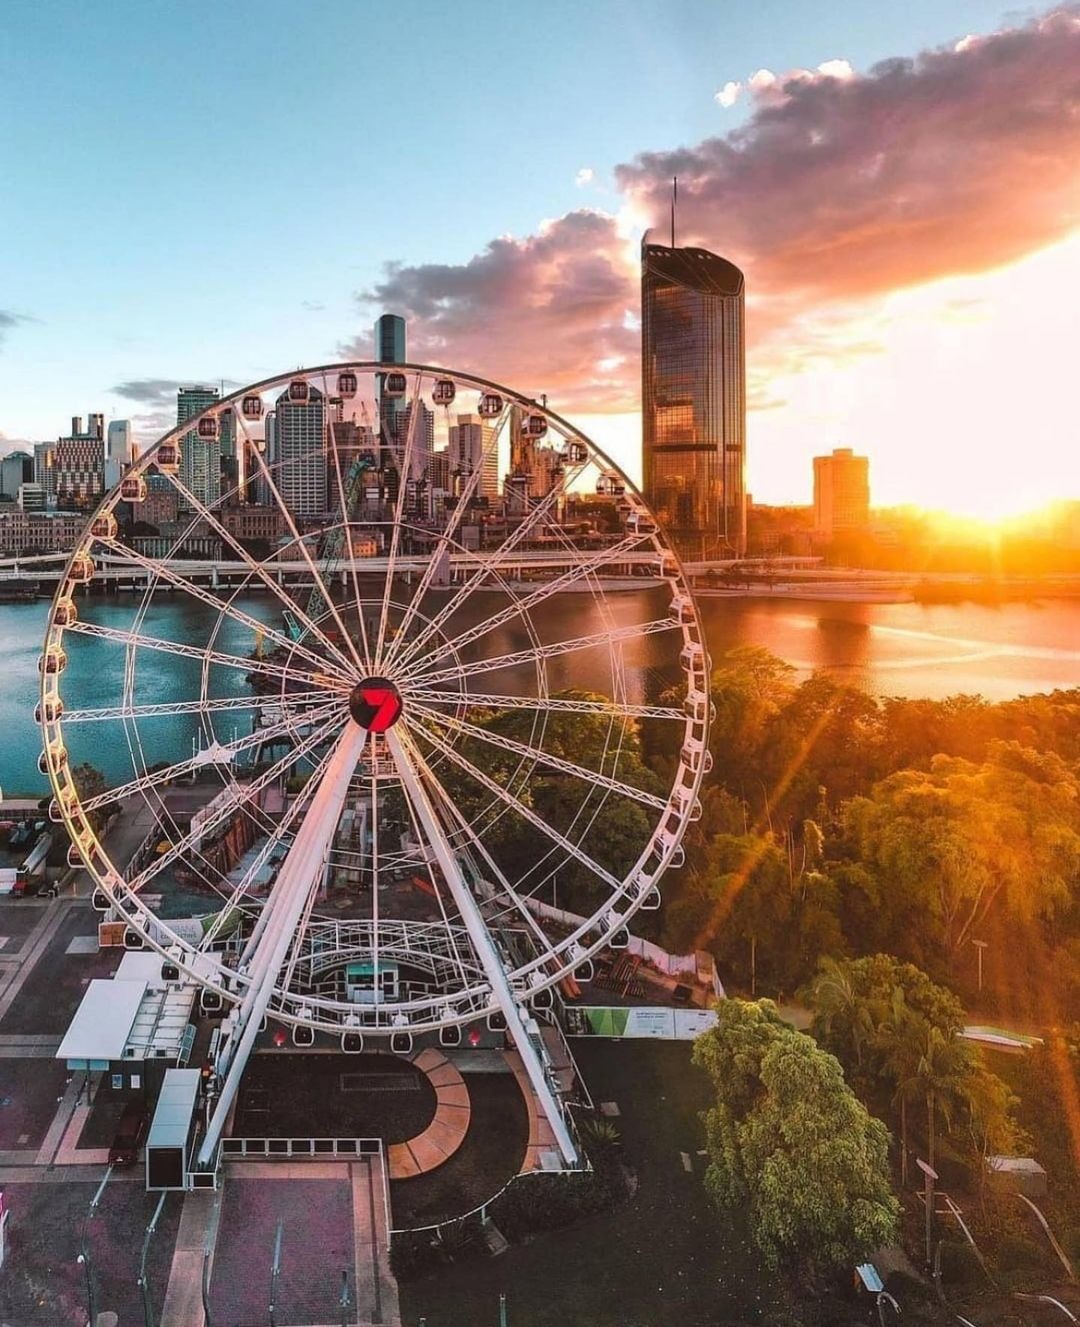 5 Reasons Why the Brisbane Ferris Wheel Should Be on Your Bucket List